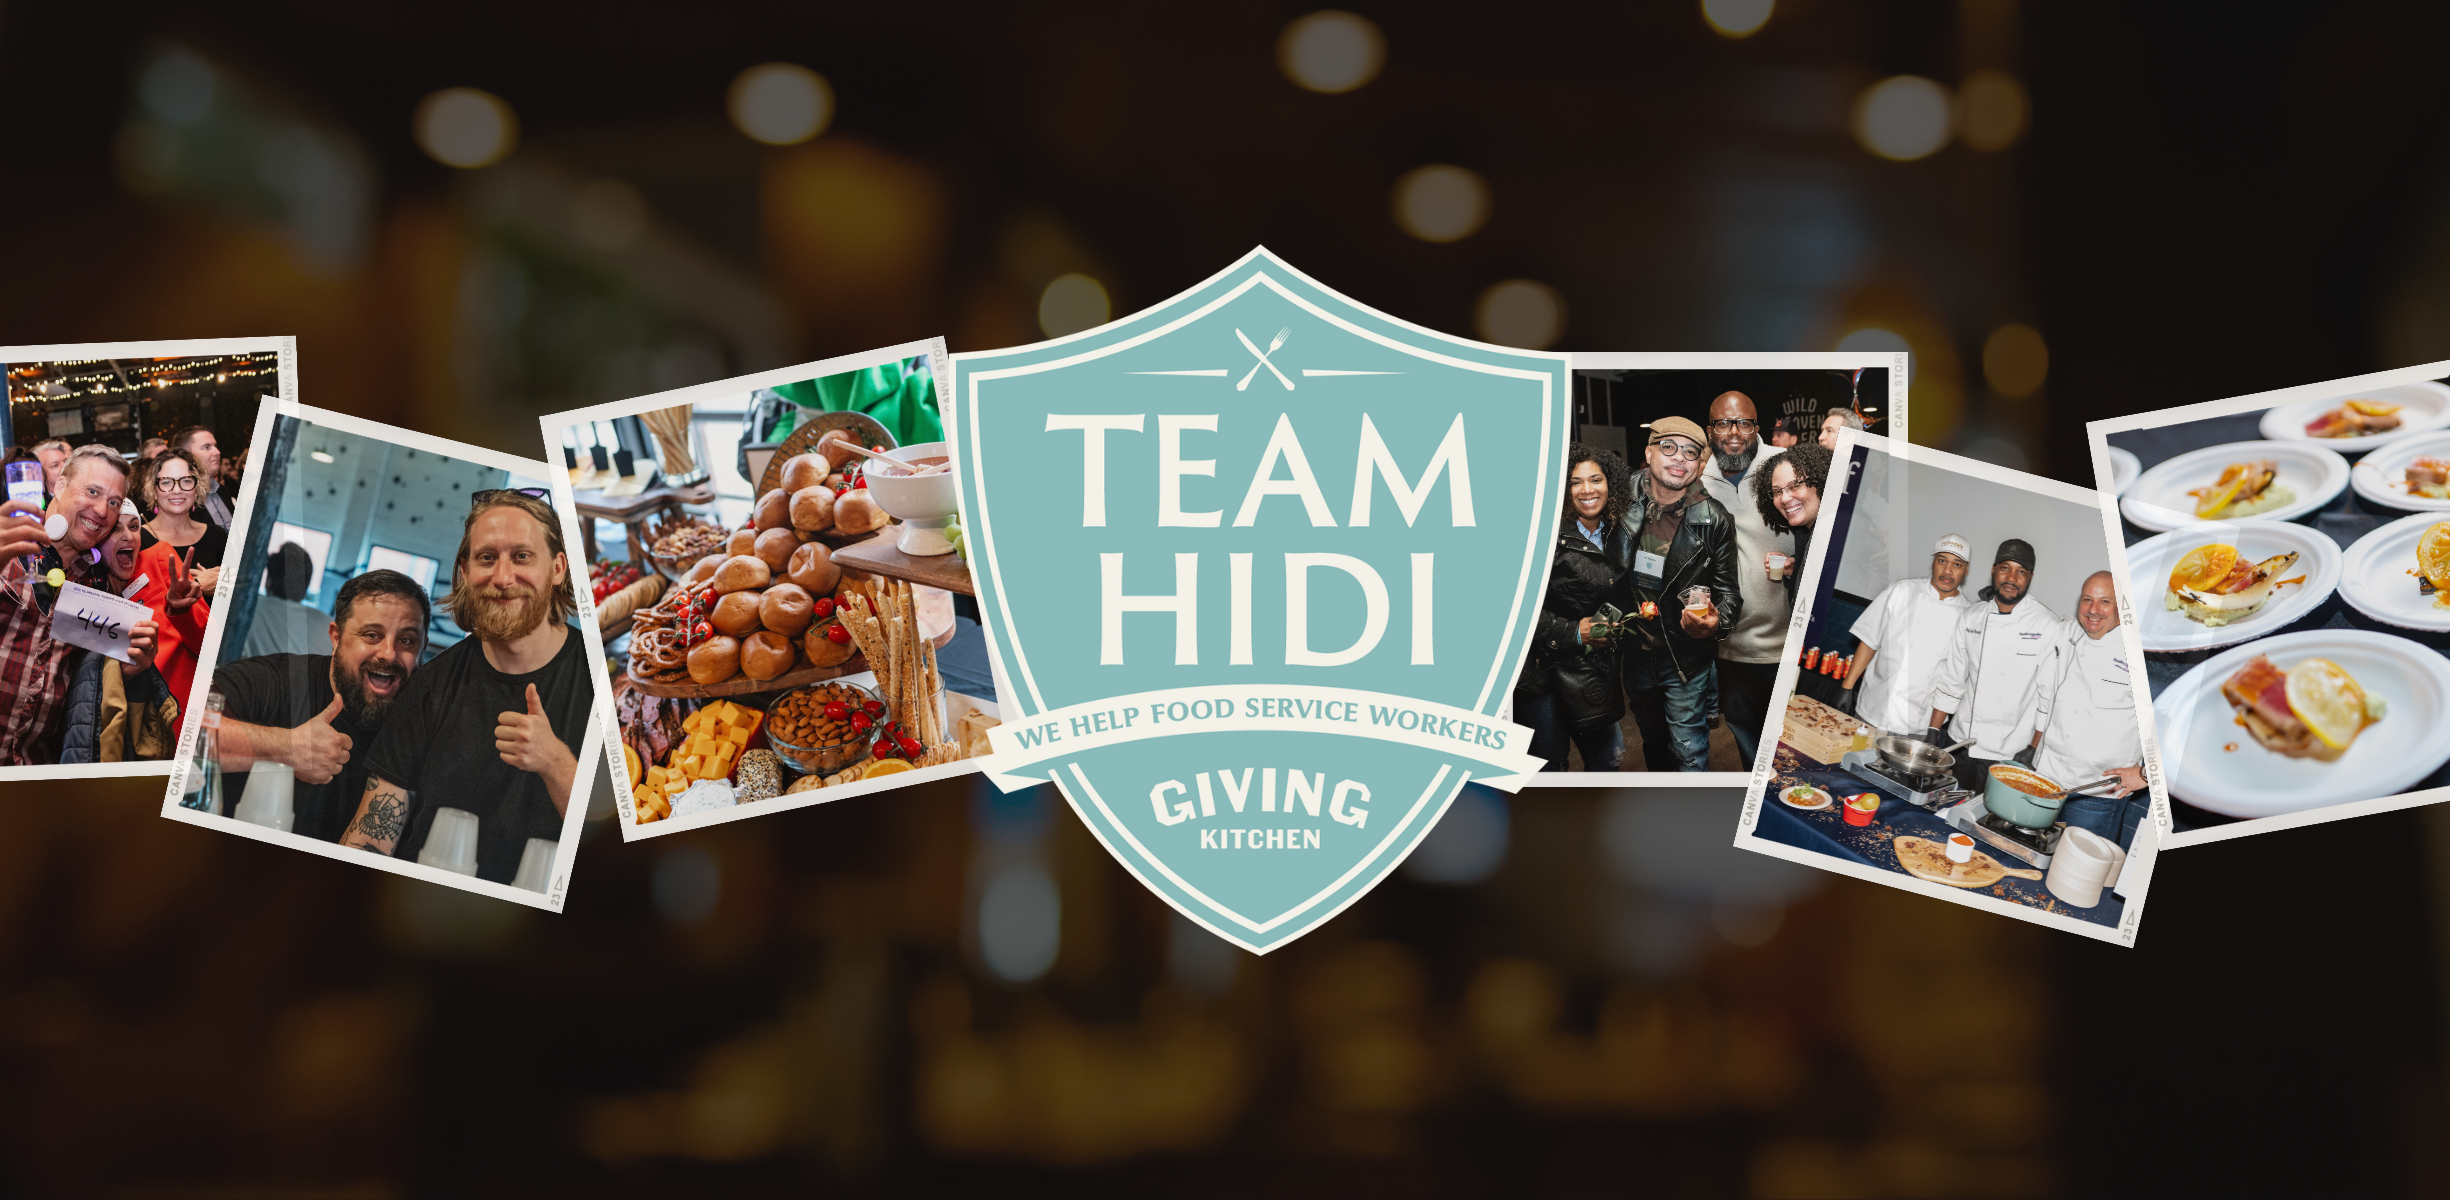 Team Hidi is an annual event hosted by the Giving Kitchen to support food service workers